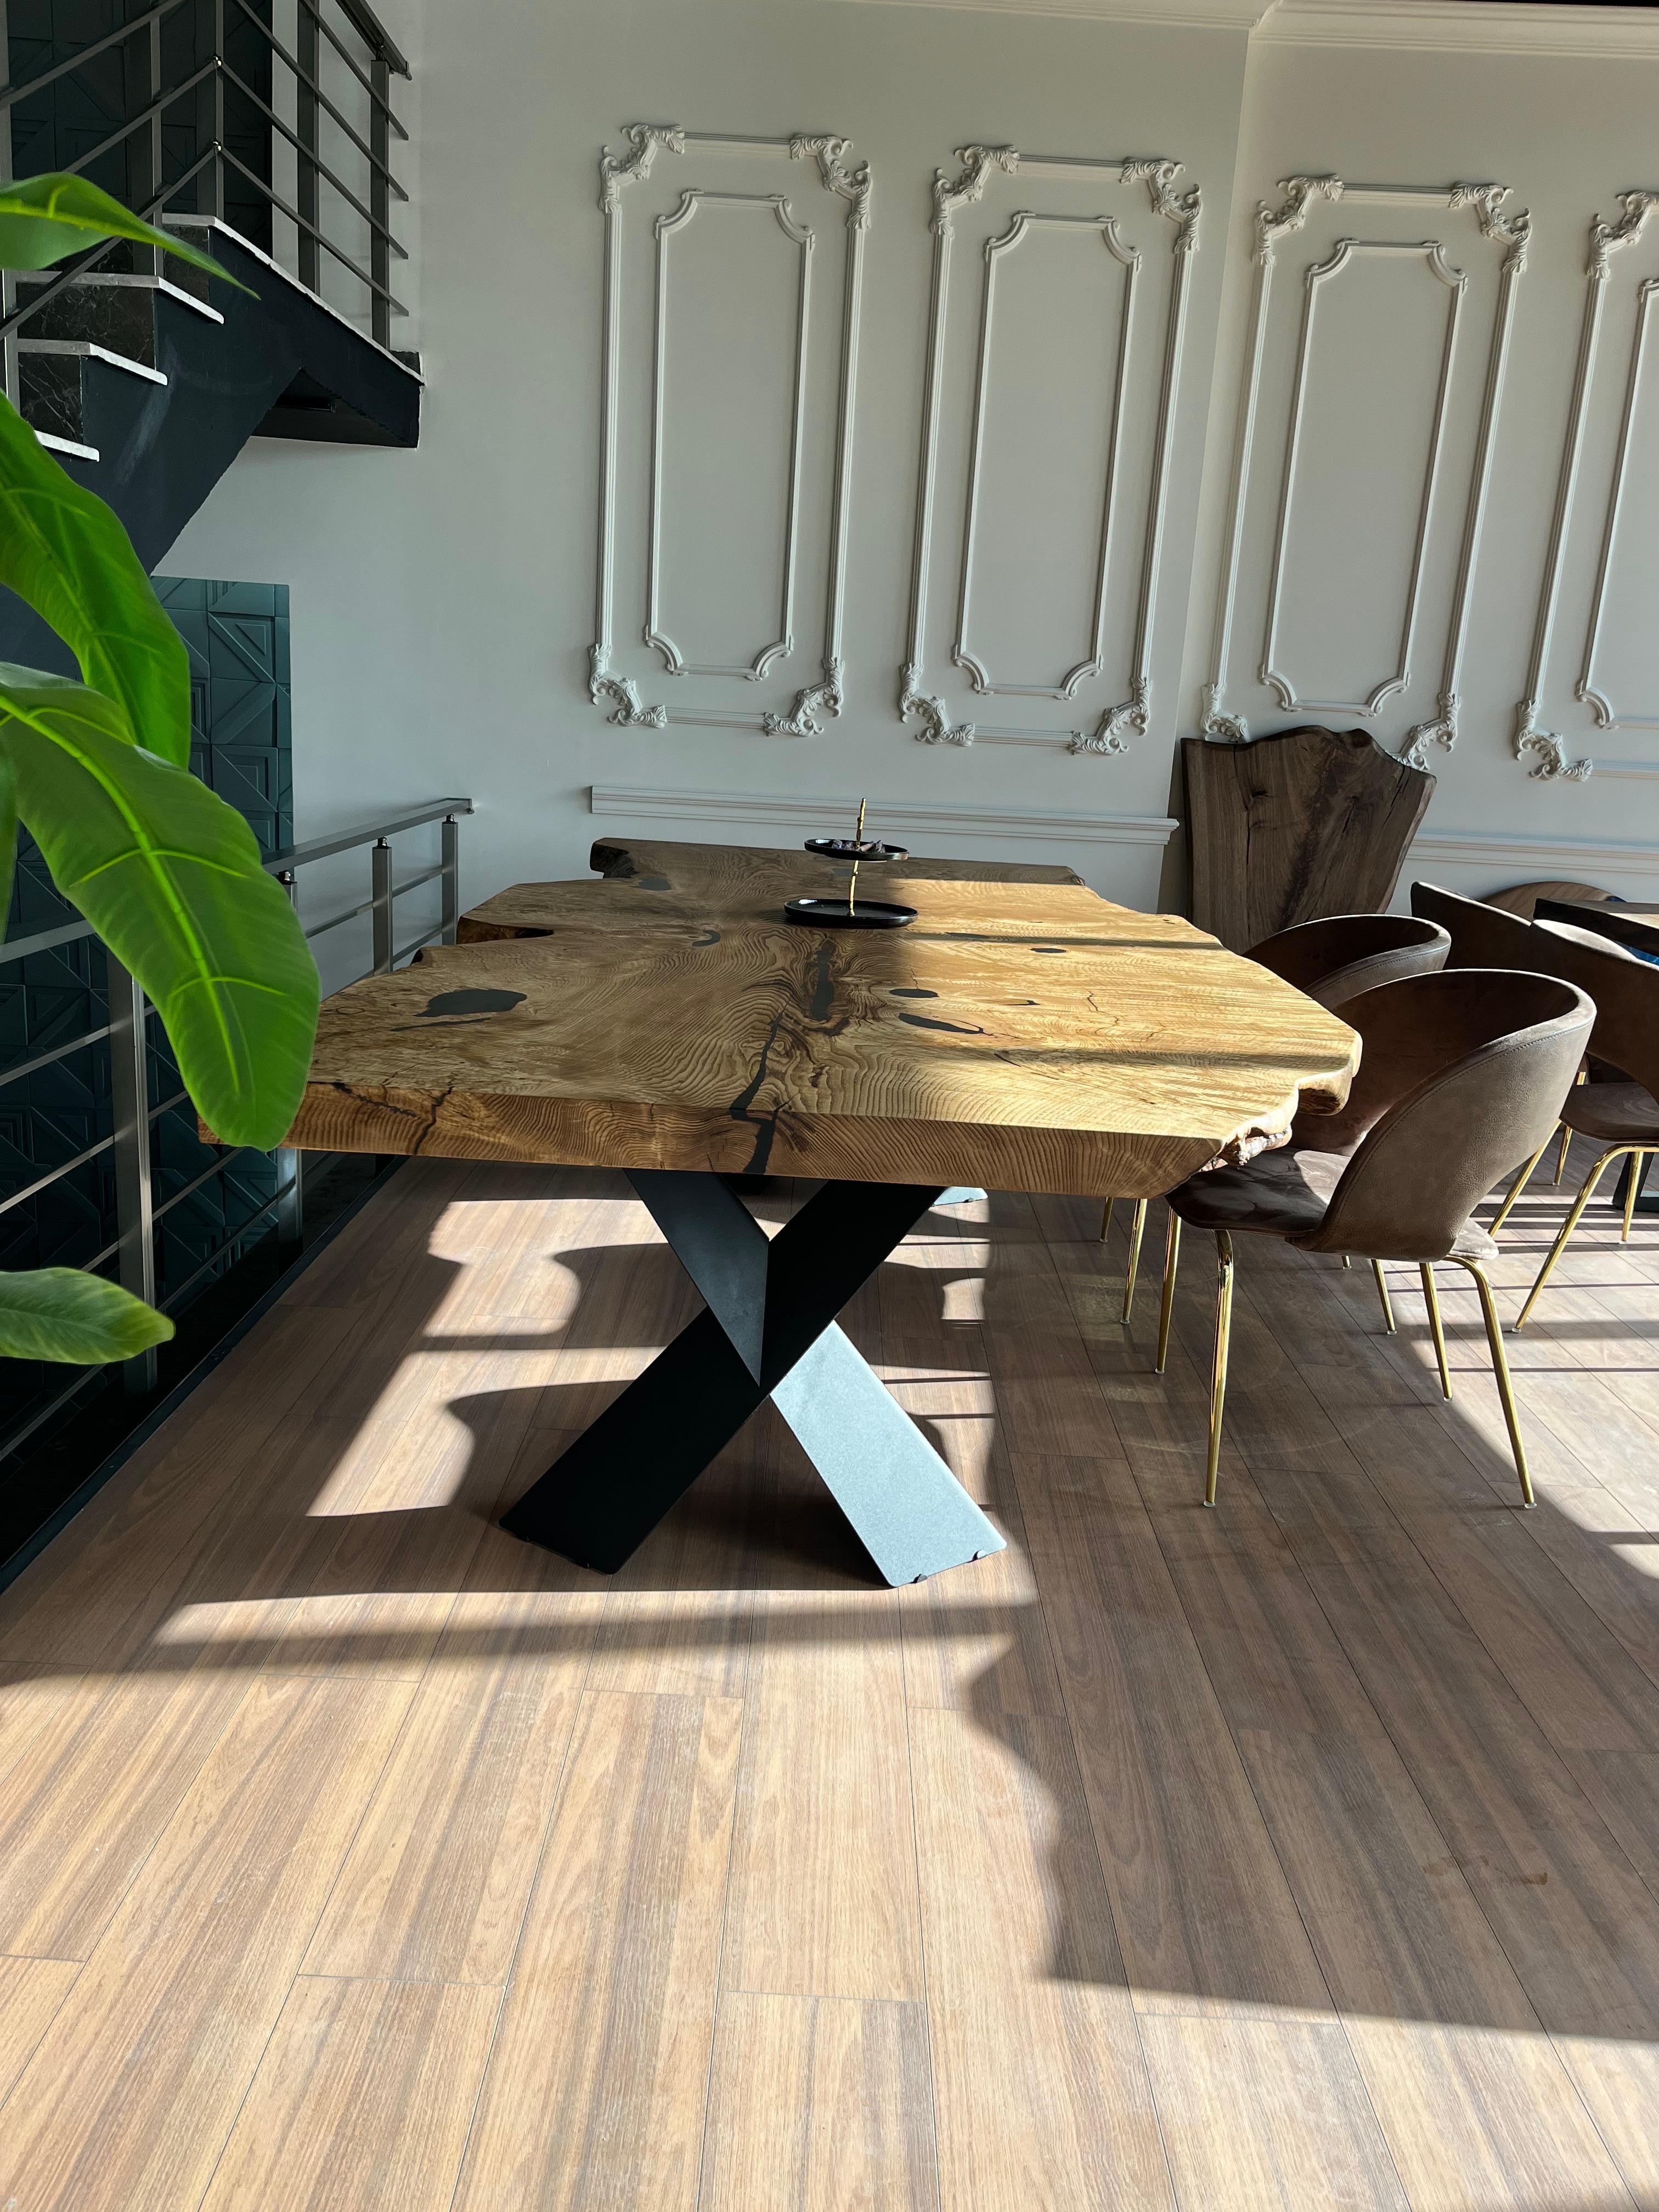 LIVE EDGE ASH WOOD DINING TABLE

This table is made of natural ash slabs. 

Some Ash slabs have a lot of natural beauty as it’s one side has a large curve. This is one of them! 

We've filled the cracks with black epoxy, without disrupting